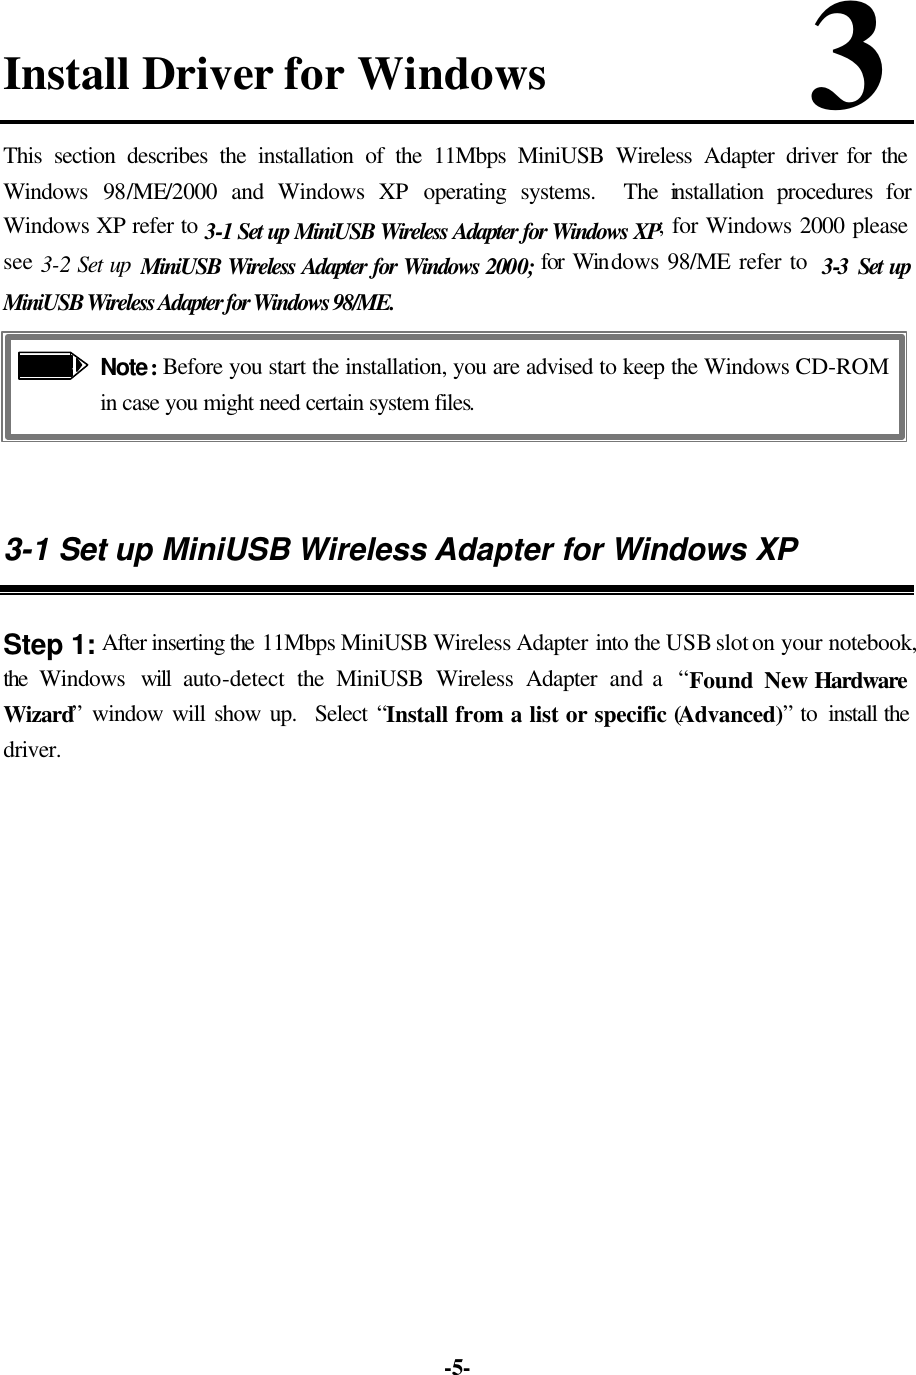   -5-Install Driver for Windows            3 This section describes the installation of the 11Mbps MiniUSB Wireless Adapter driver for the Windows 98/ME/2000 and Windows XP operating systems.  The installation procedures for Windows XP refer to 3-1 Set up MiniUSB Wireless Adapter for Windows XP; for Windows 2000 please see 3-2 Set up MiniUSB Wireless Adapter for Windows 2000; for Windows 98/ME refer to  3-3  Set up MiniUSB Wireless Adapter for Windows 98/ME.  Note: Before you start the installation, you are advised to keep the Windows CD-ROM in case you might need certain system files.   3-1 Set up MiniUSB Wireless Adapter for Windows XP  Step 1: After inserting the 11Mbps MiniUSB Wireless Adapter into the USB slot on your notebook, the Windows  will  auto-detect  the MiniUSB Wireless Adapter and a  “Found New Hardware  Wizard” window will show up.  Select “Install from a list or specific (Advanced)” to install the driver.   